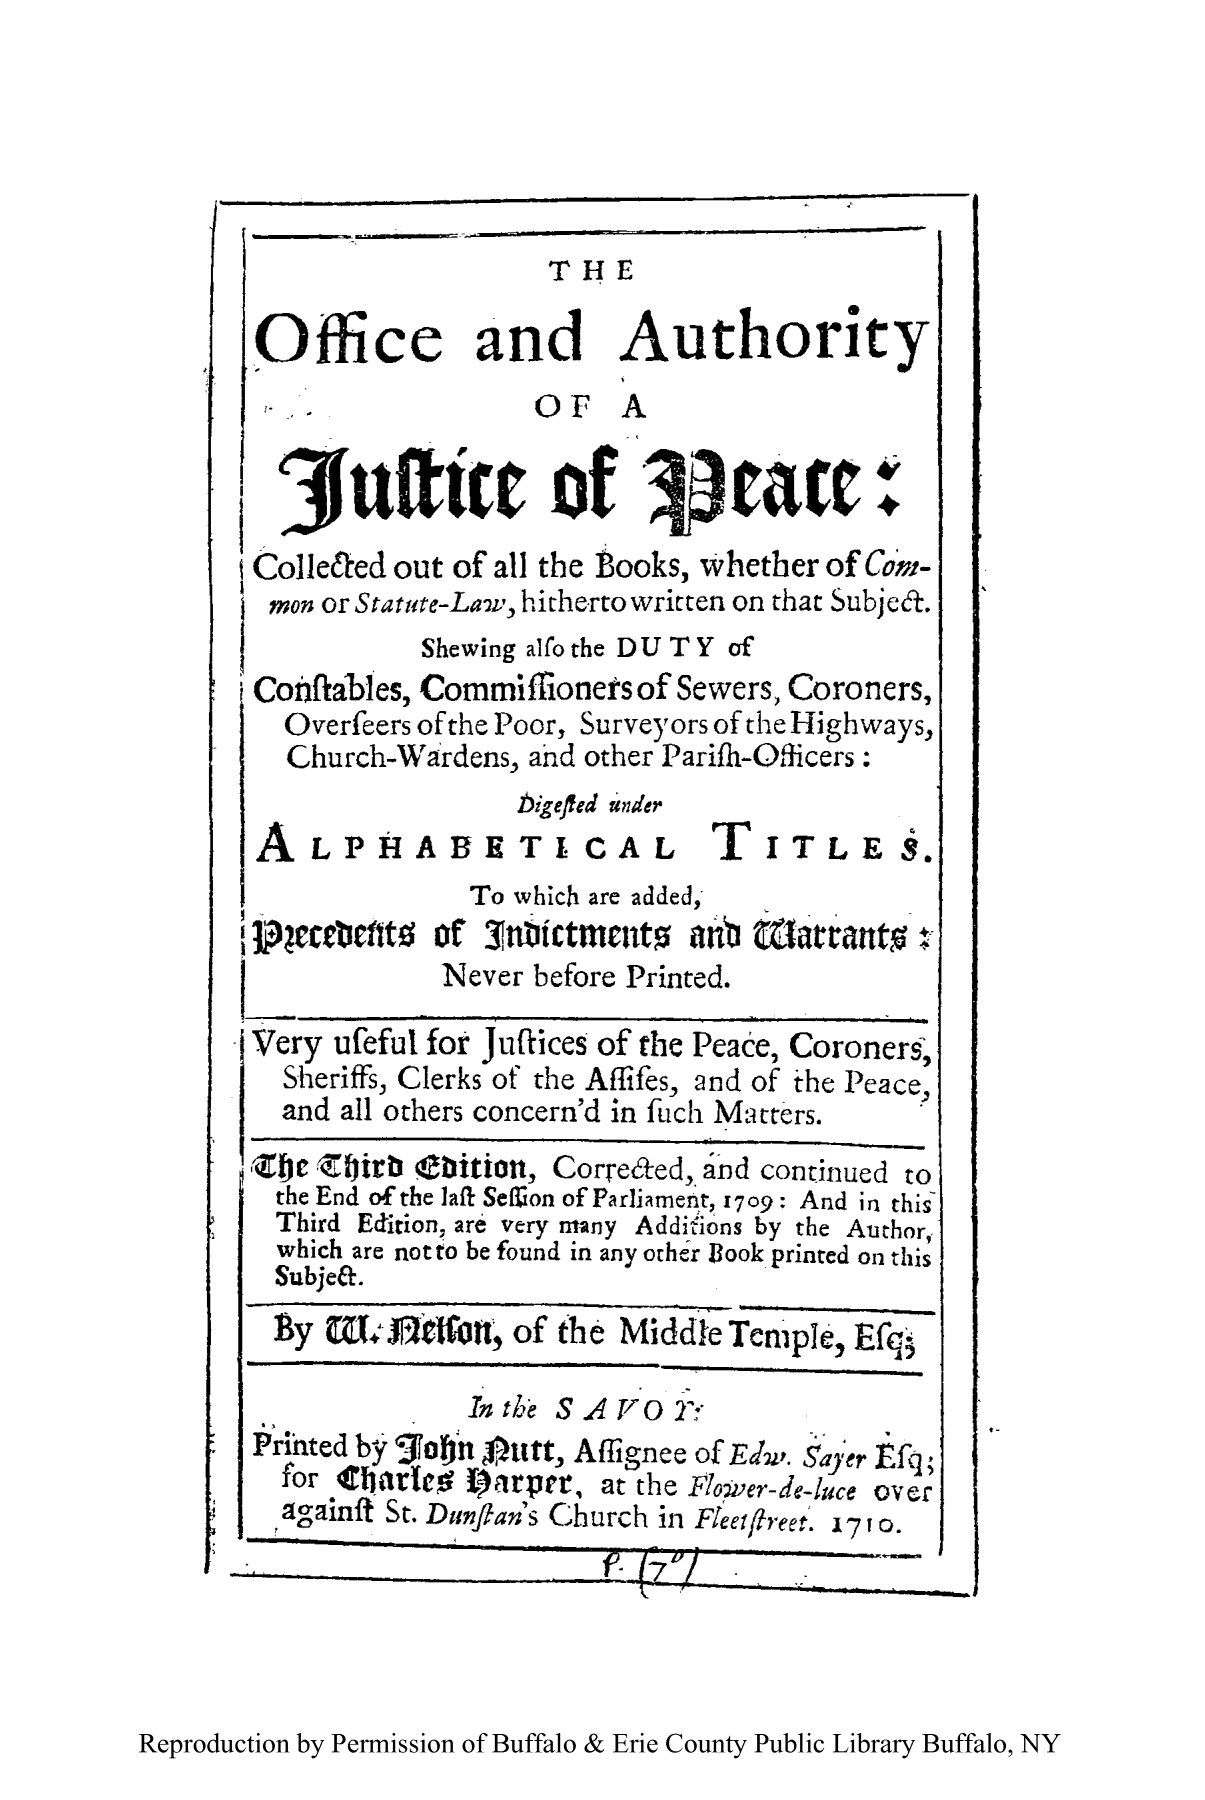 handle is hein.beal/oauthjup0001 and id is 1 raw text is: THE
Office and Authority
OF A
jufttw ]of                    rtawt:
ColleCted out of all the tooks, whether of Comn-
mon or Stature-Lav, hitherto written on that Subjef.
Shewing alfo the DU TY of
Conftables, Commiffioners of Sewers, Coroners,
Overfeers of the Poor, Surveyors of the Highways,
Church-Wardens, ahd other Parifh-Officers:
bigefted under
A LPHABETICAL TITLES.
To which are added,
]+jcrttt0 of 3tnbtictmntat nu fLarrant :
Never before Printed.
Very ufeful for Junfces of the Peace, Coroners,
Sheriffs, Clerks of the Aflifes, and of the Peace
and all others concern'd in fuch Matters.
tie Zirbi Ebitiott, Correfted, and continued to
the End of the Jafi Sef60n of Parliamenit, 1709: And in this
Third Edition, are very many Additions by the Author,
which are not to be found in any other B3ook printed on this
Subjet.
By Wmflcfotn  ; of the Middl Tenple, Efq
In the S AVO T
Prihted by 3otut4njmt, Aflignee of EdI. Sayer Efq;
for Cinrlt tOi arper, at the Flower-dce-luce over
againff St. Dunflan's Church in Flcateete. ip0.

Reproduction by Permission of Buffalo & Erie County Public Library Buffalo, NY


